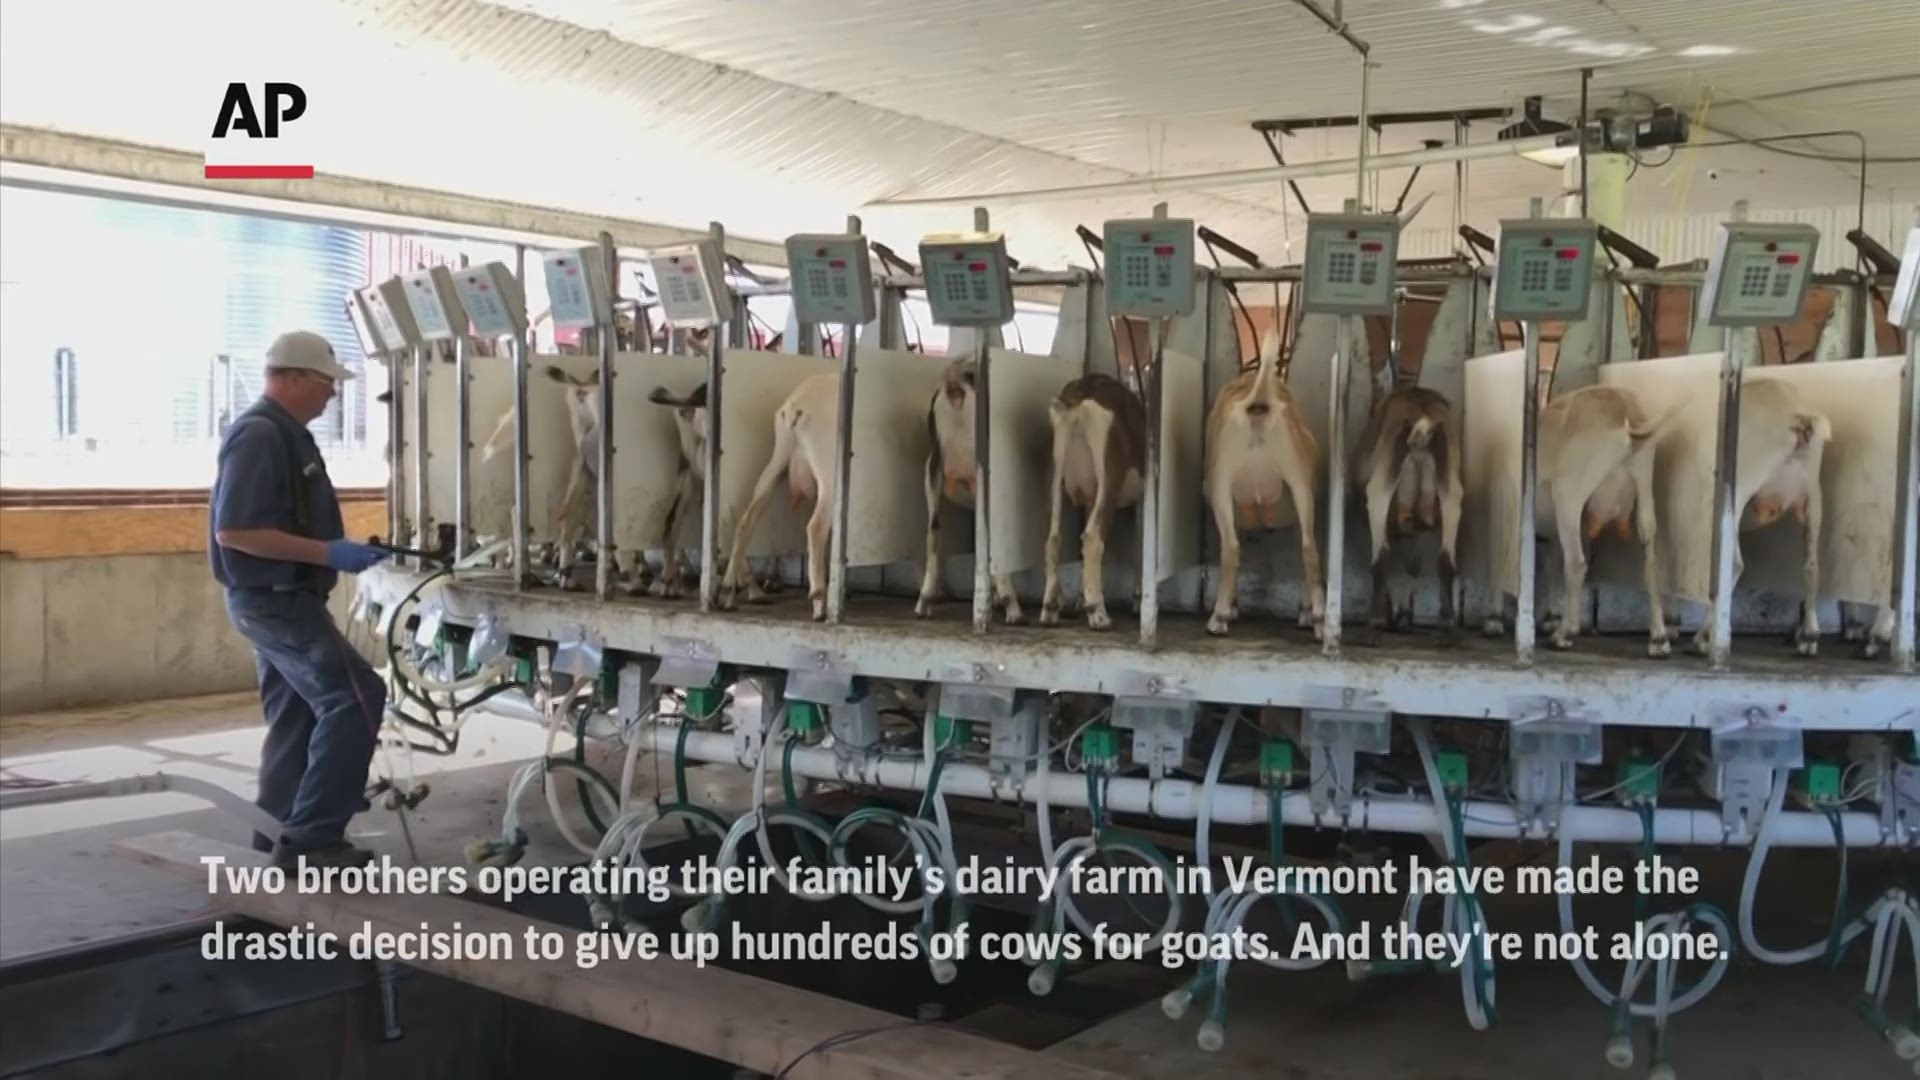 Two brothers operating their family’s dairy farm in Vermont made the drastic decision to give up hundreds of cows for goats.